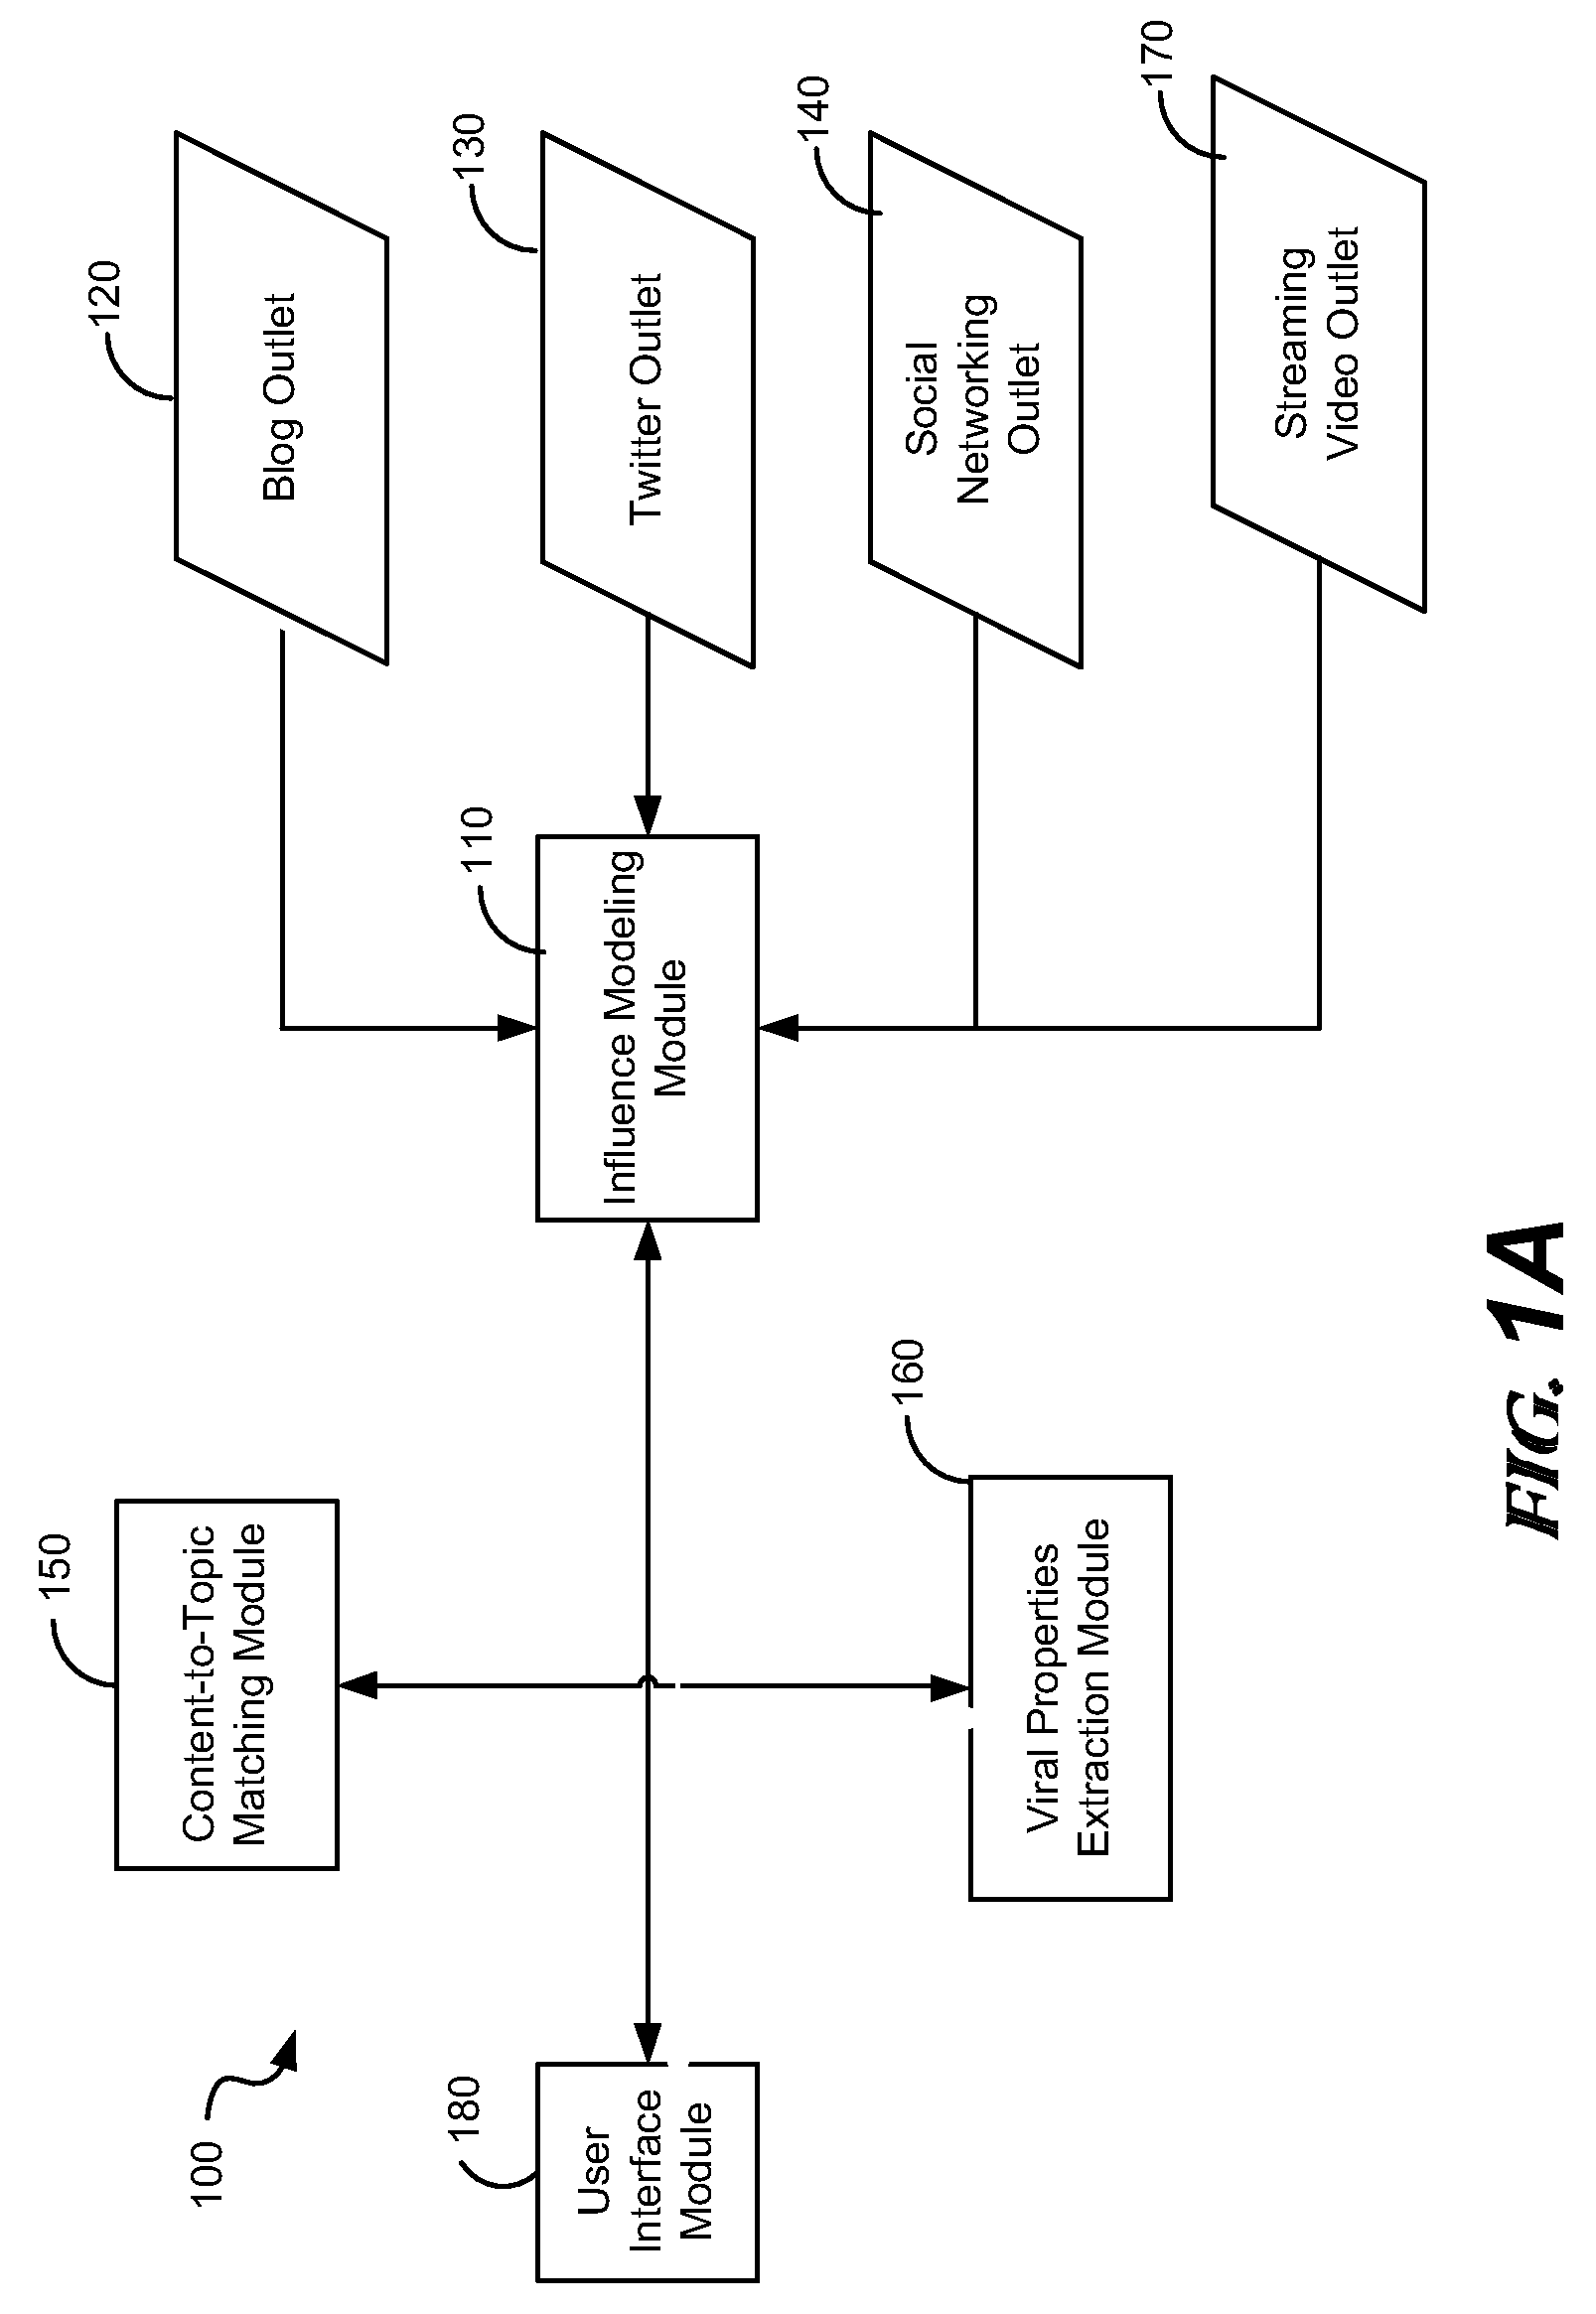 Method and system for determining topical on-line influence of an entity